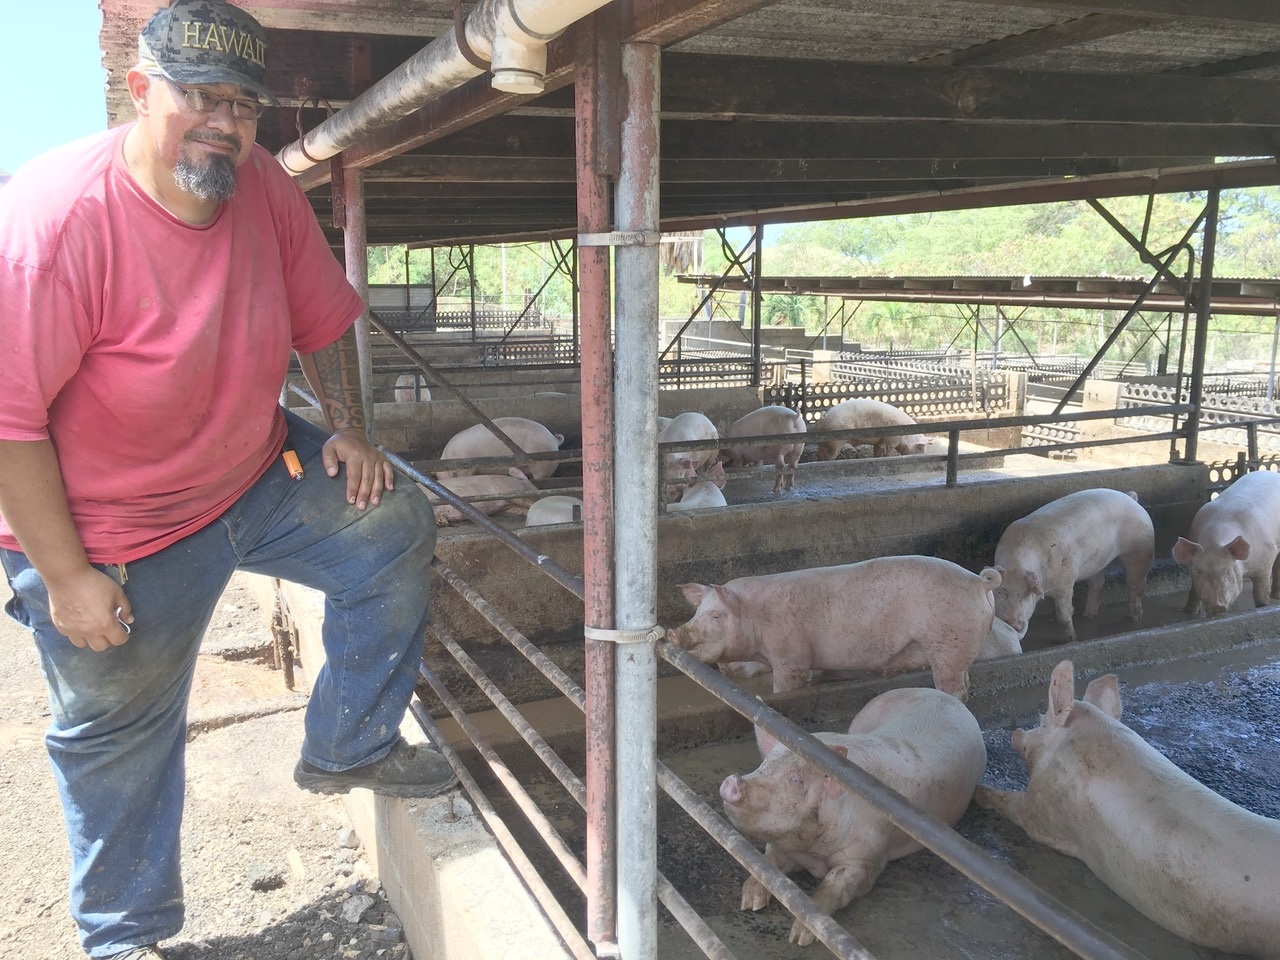 Mr. Elliot Telles, the owner, happy with his healthy pigs 